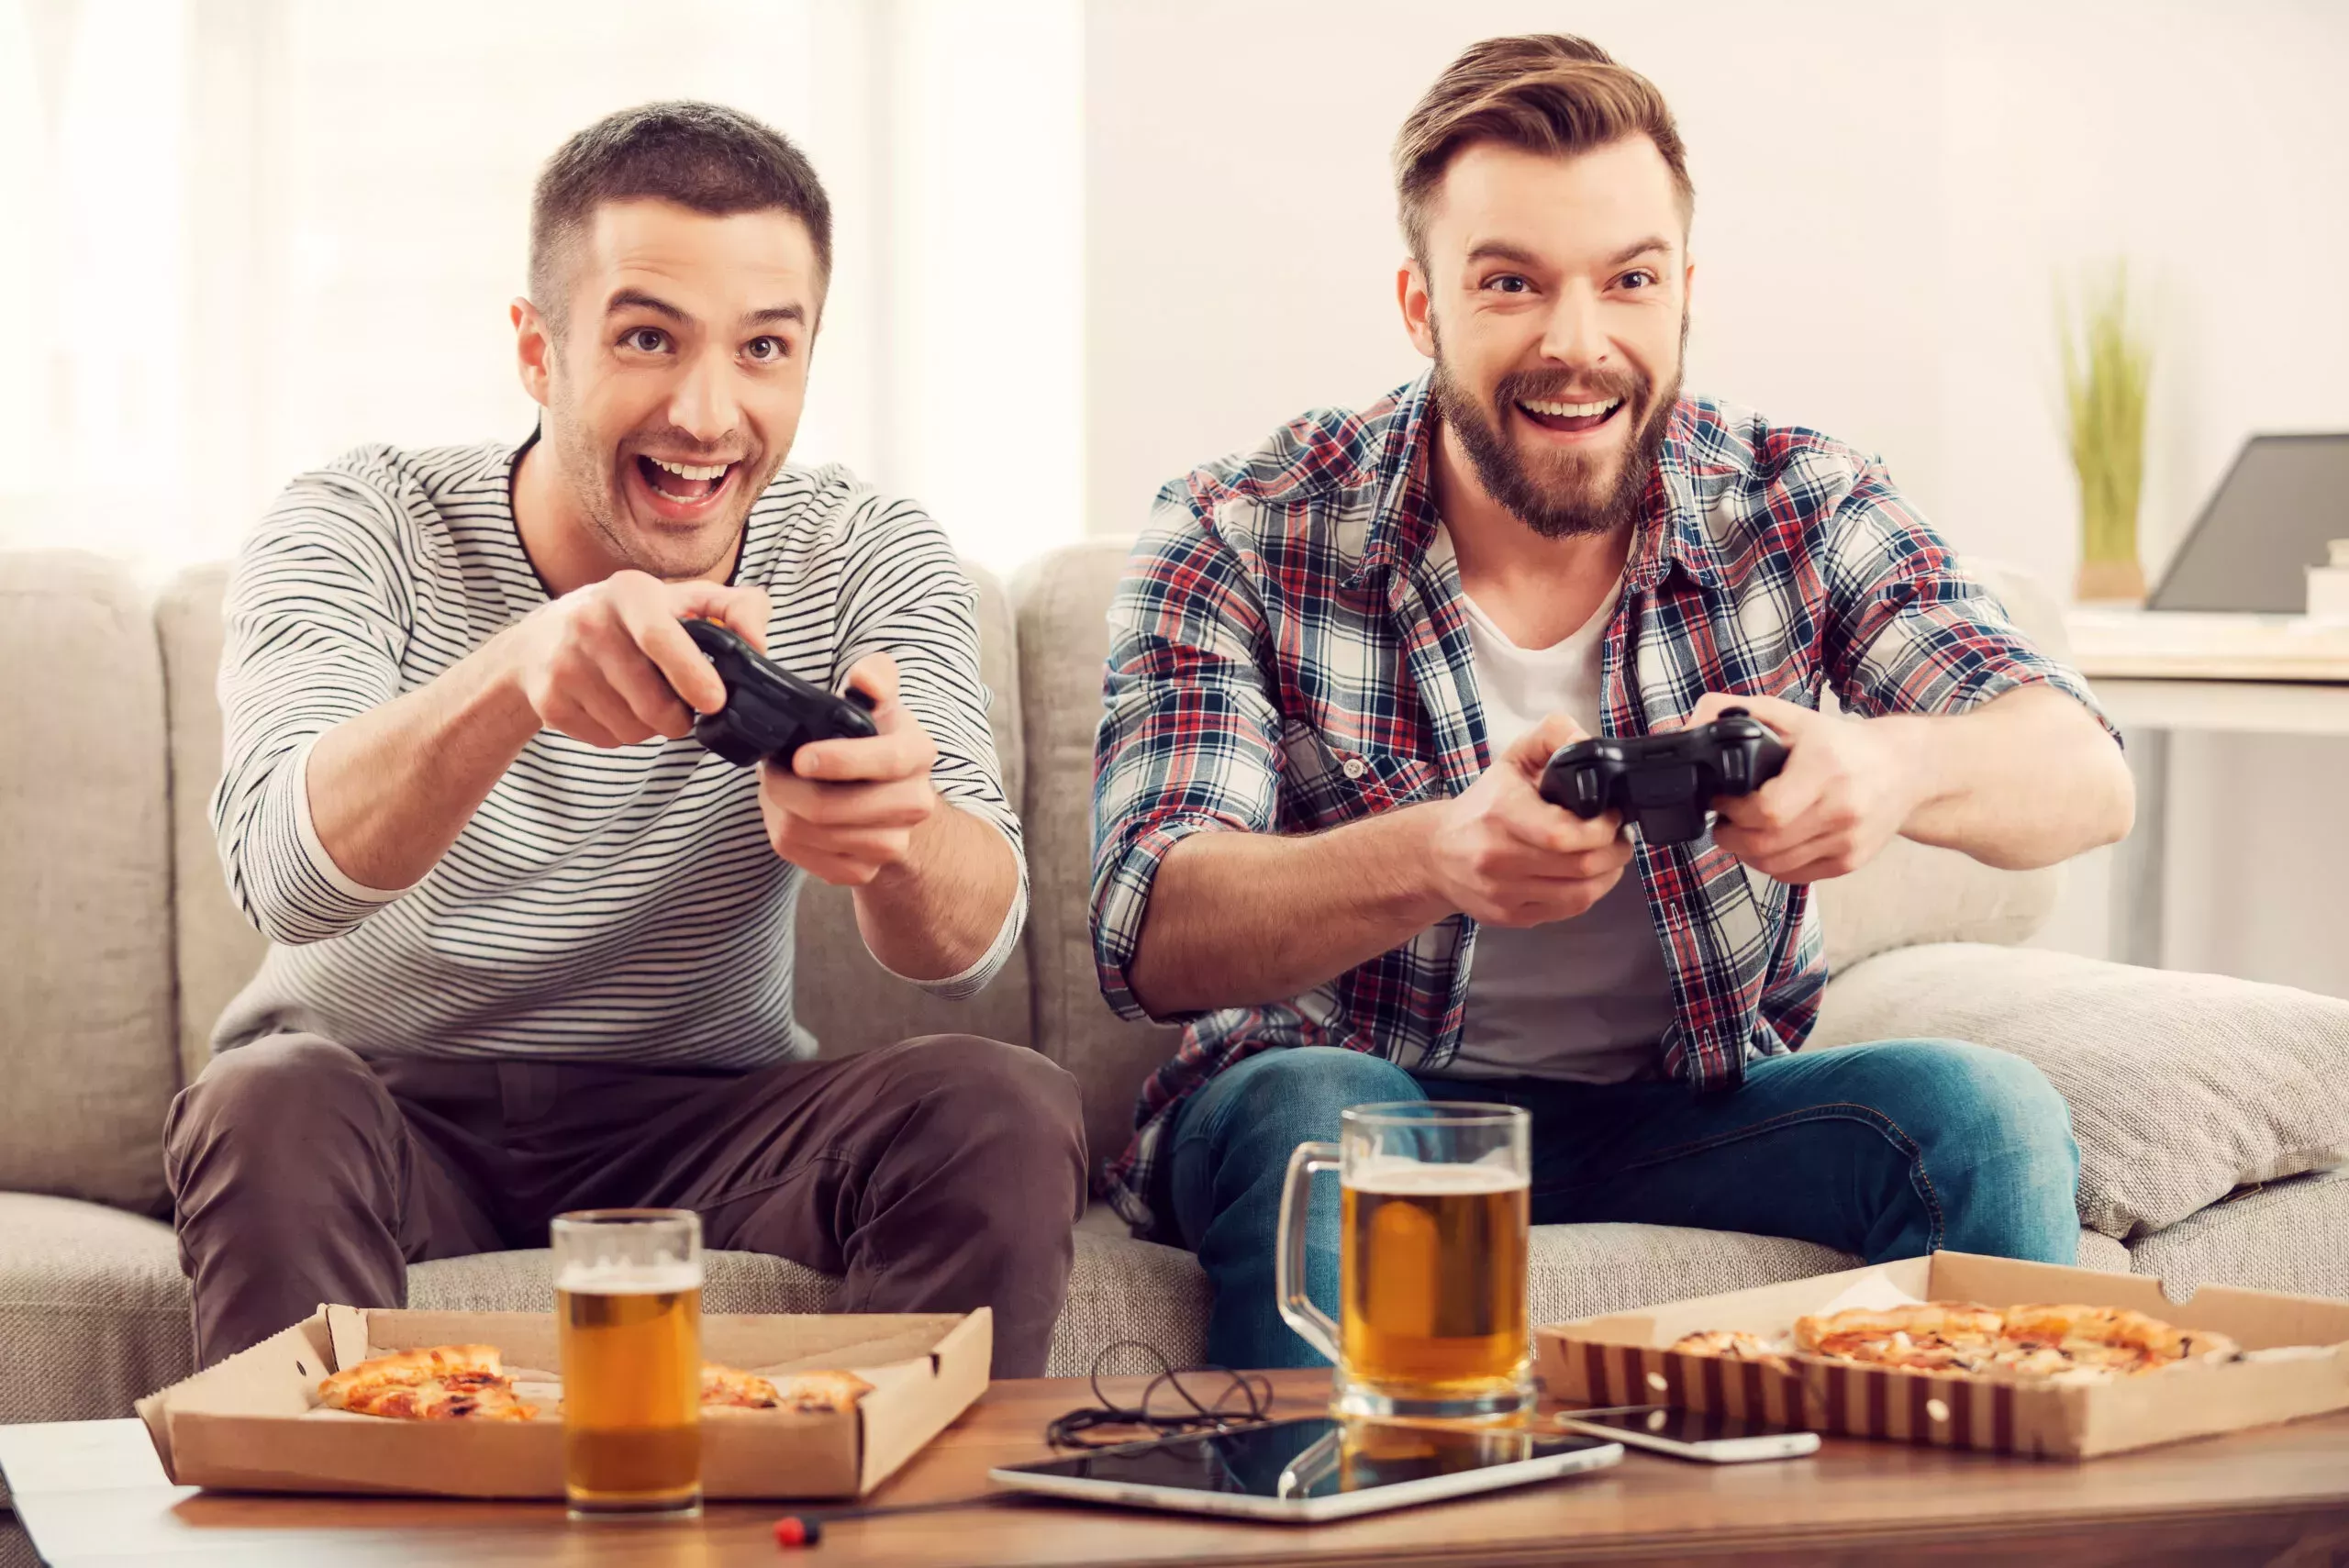 gamer bros, video games, advice, gay relationships, advice